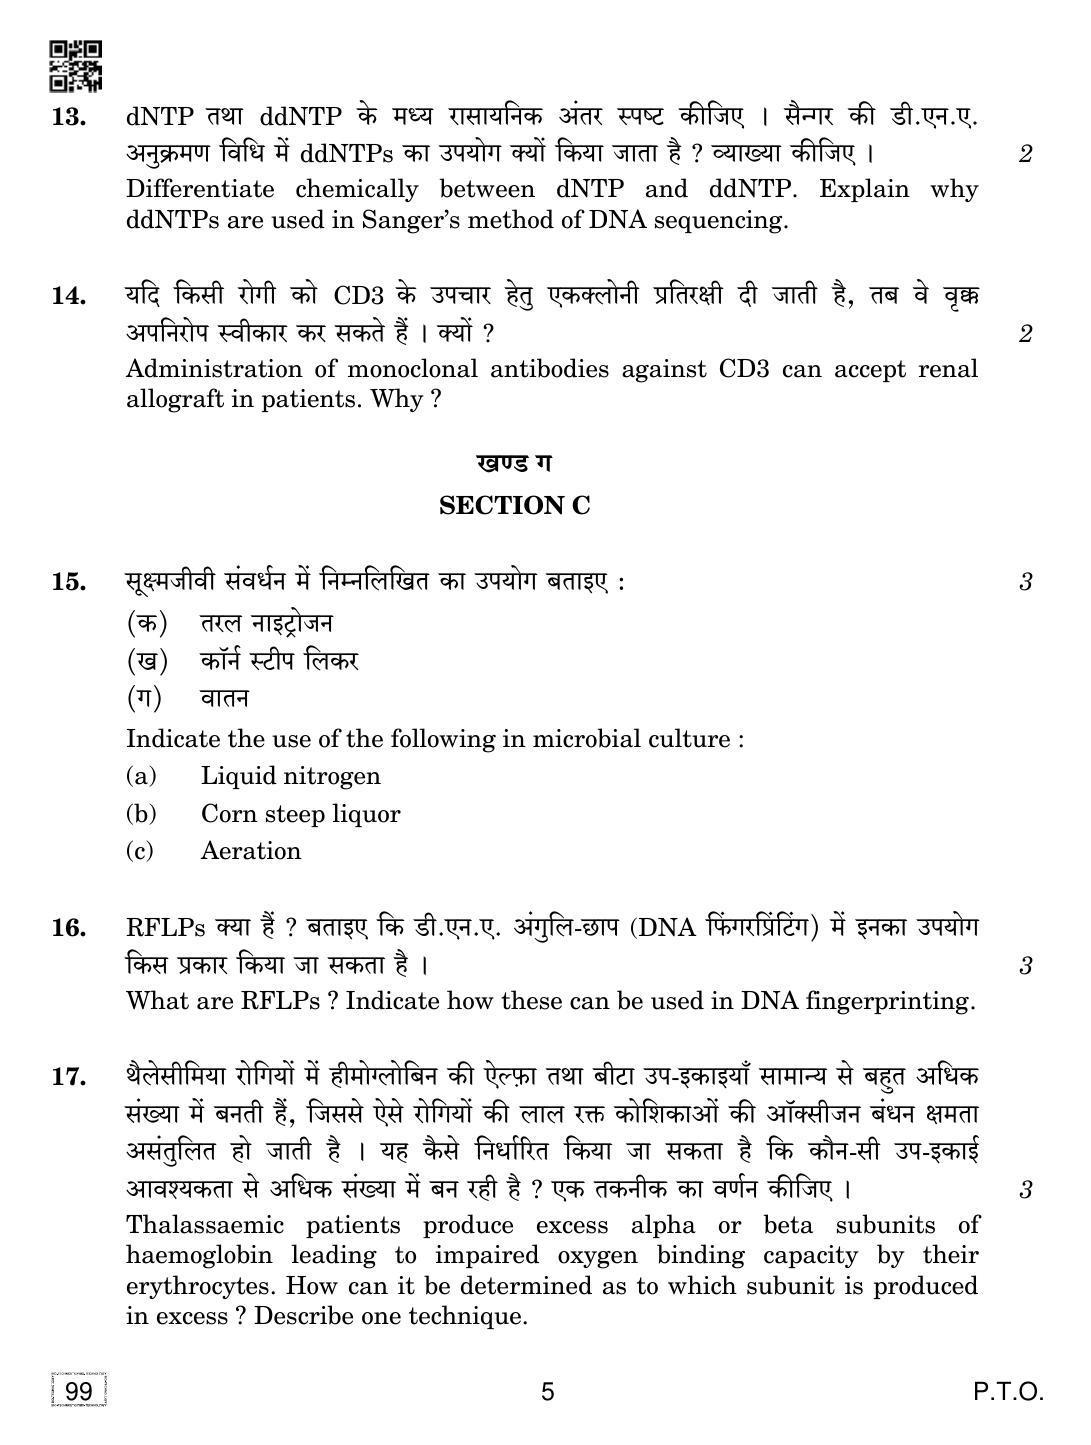 CBSE Class 12 99 BIOTECHNOLOGY 2019 Compartment Question Paper - Page 5